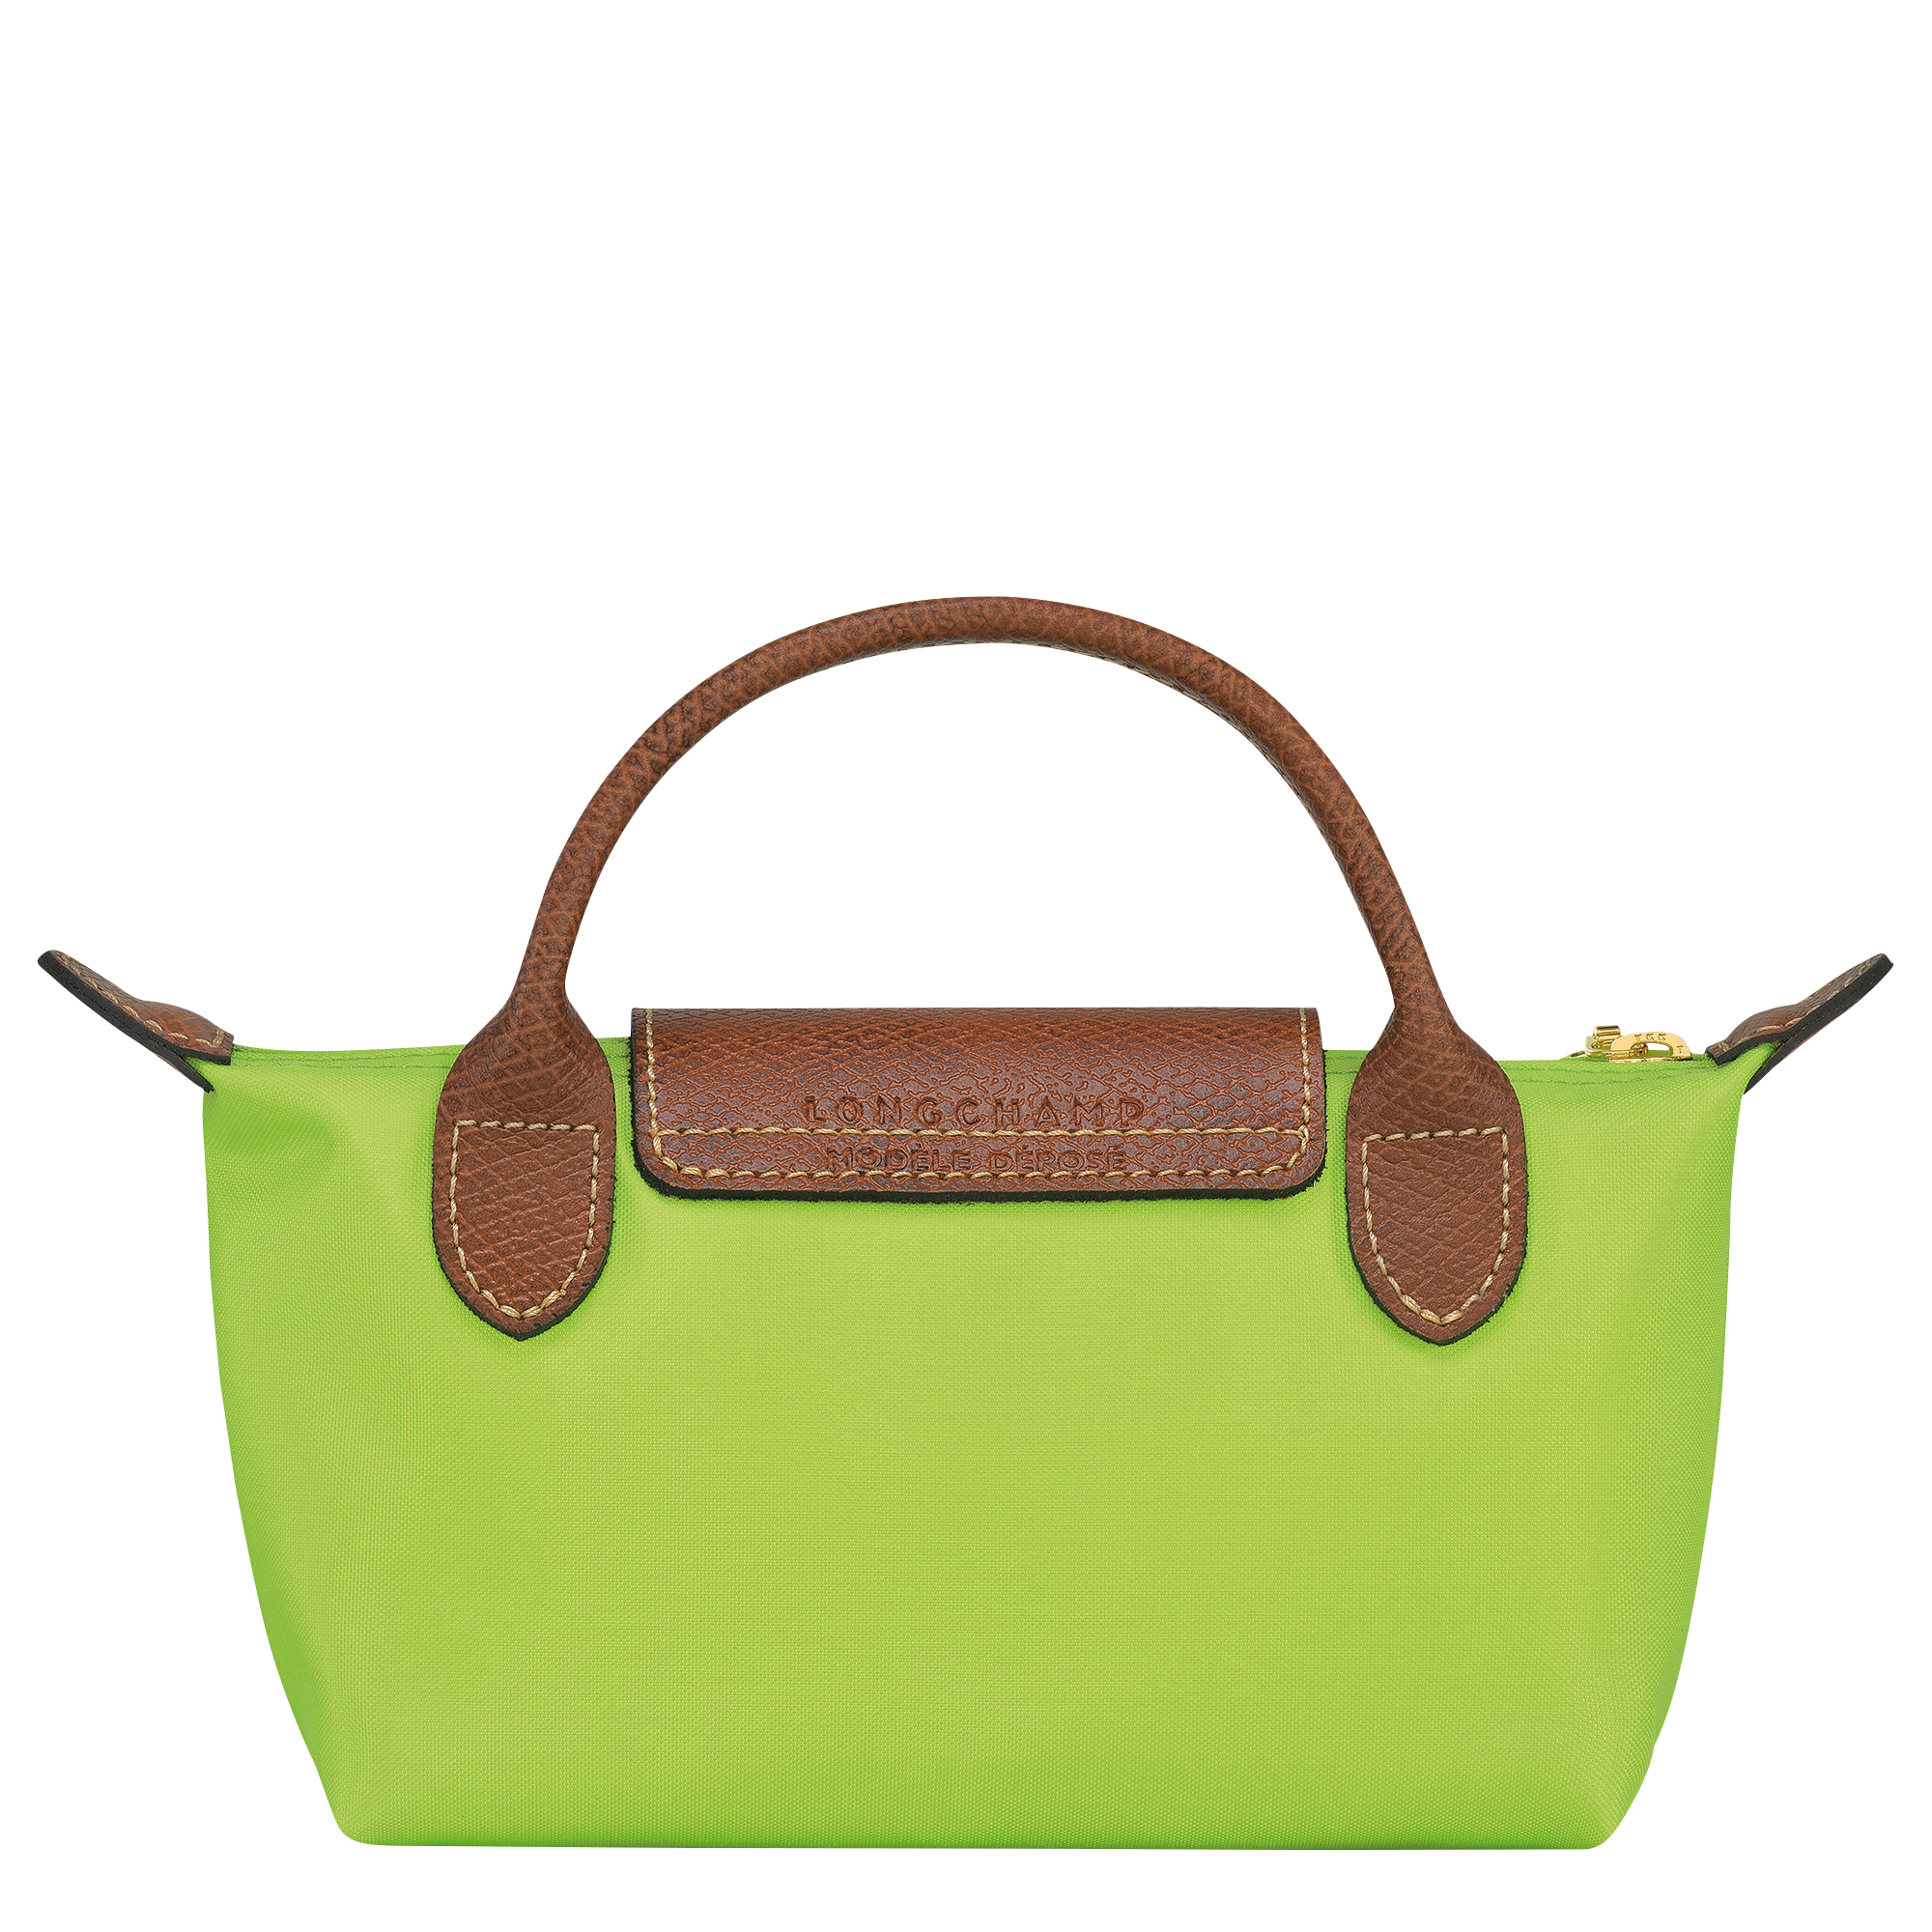 Longchamp LE PLIAGE ORIGINAL - Pouch with handle in Green Light - 4 (SKU: 34175089355)